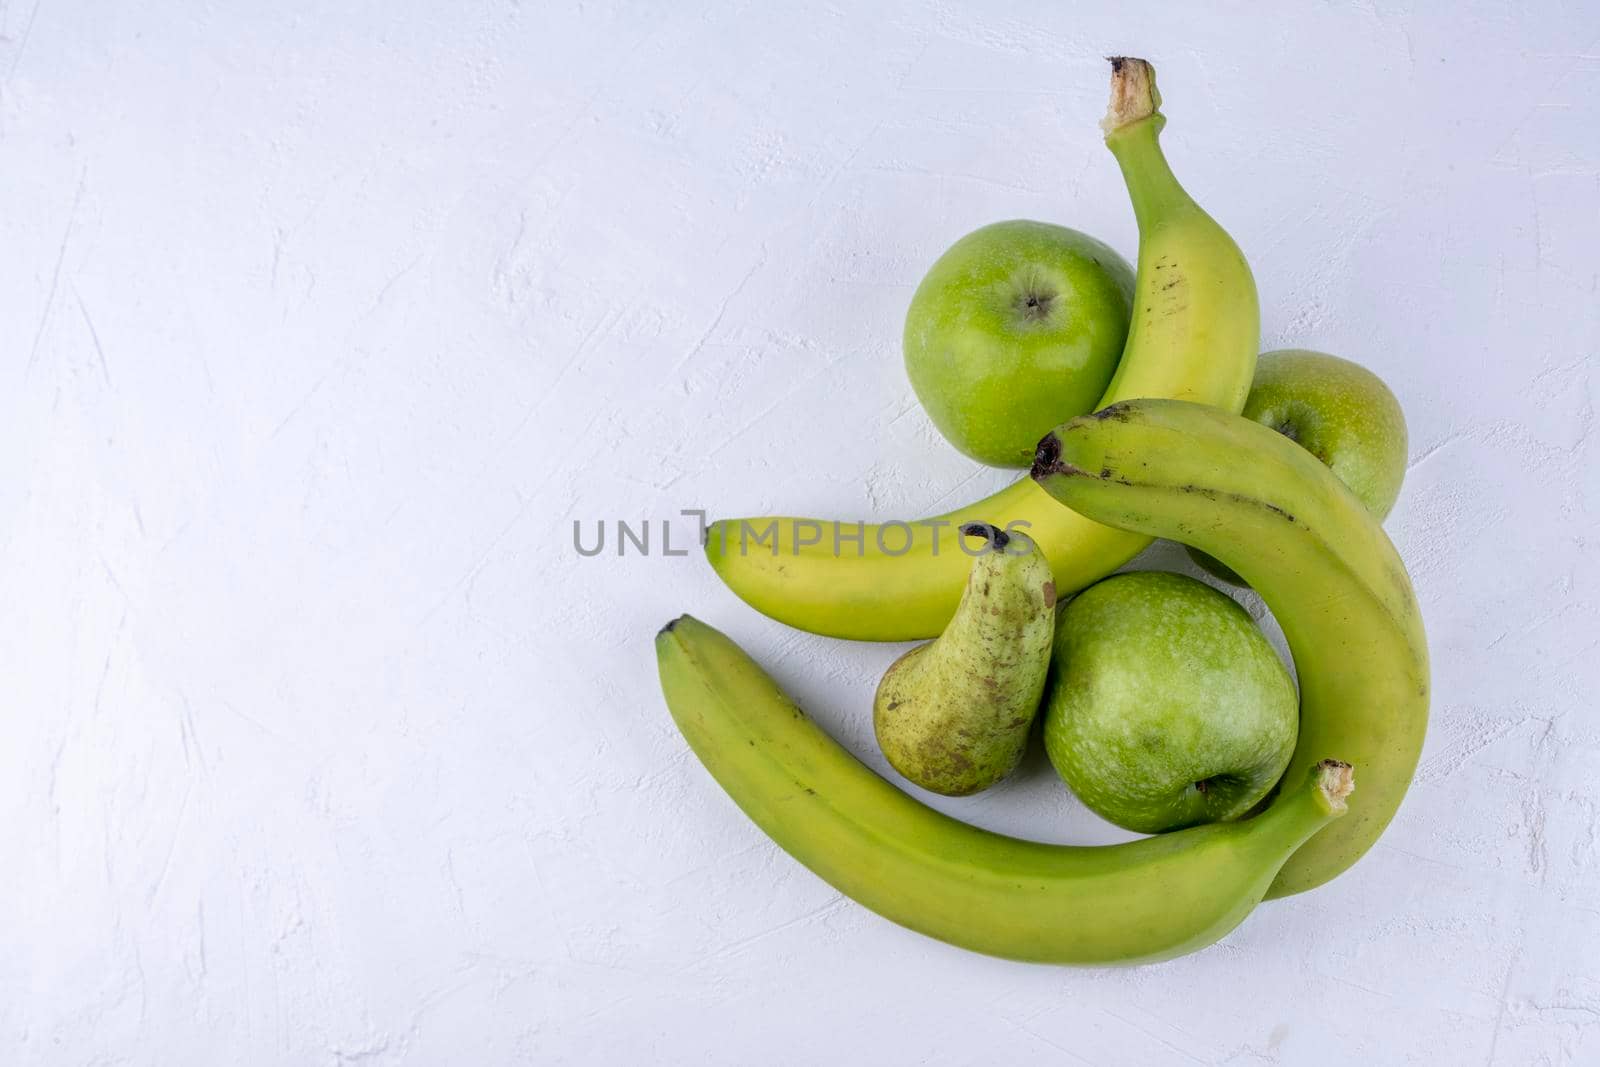 Fresh green apples, pears, bananas on a white wooden background. Concept healthy food photo. by sashokddt